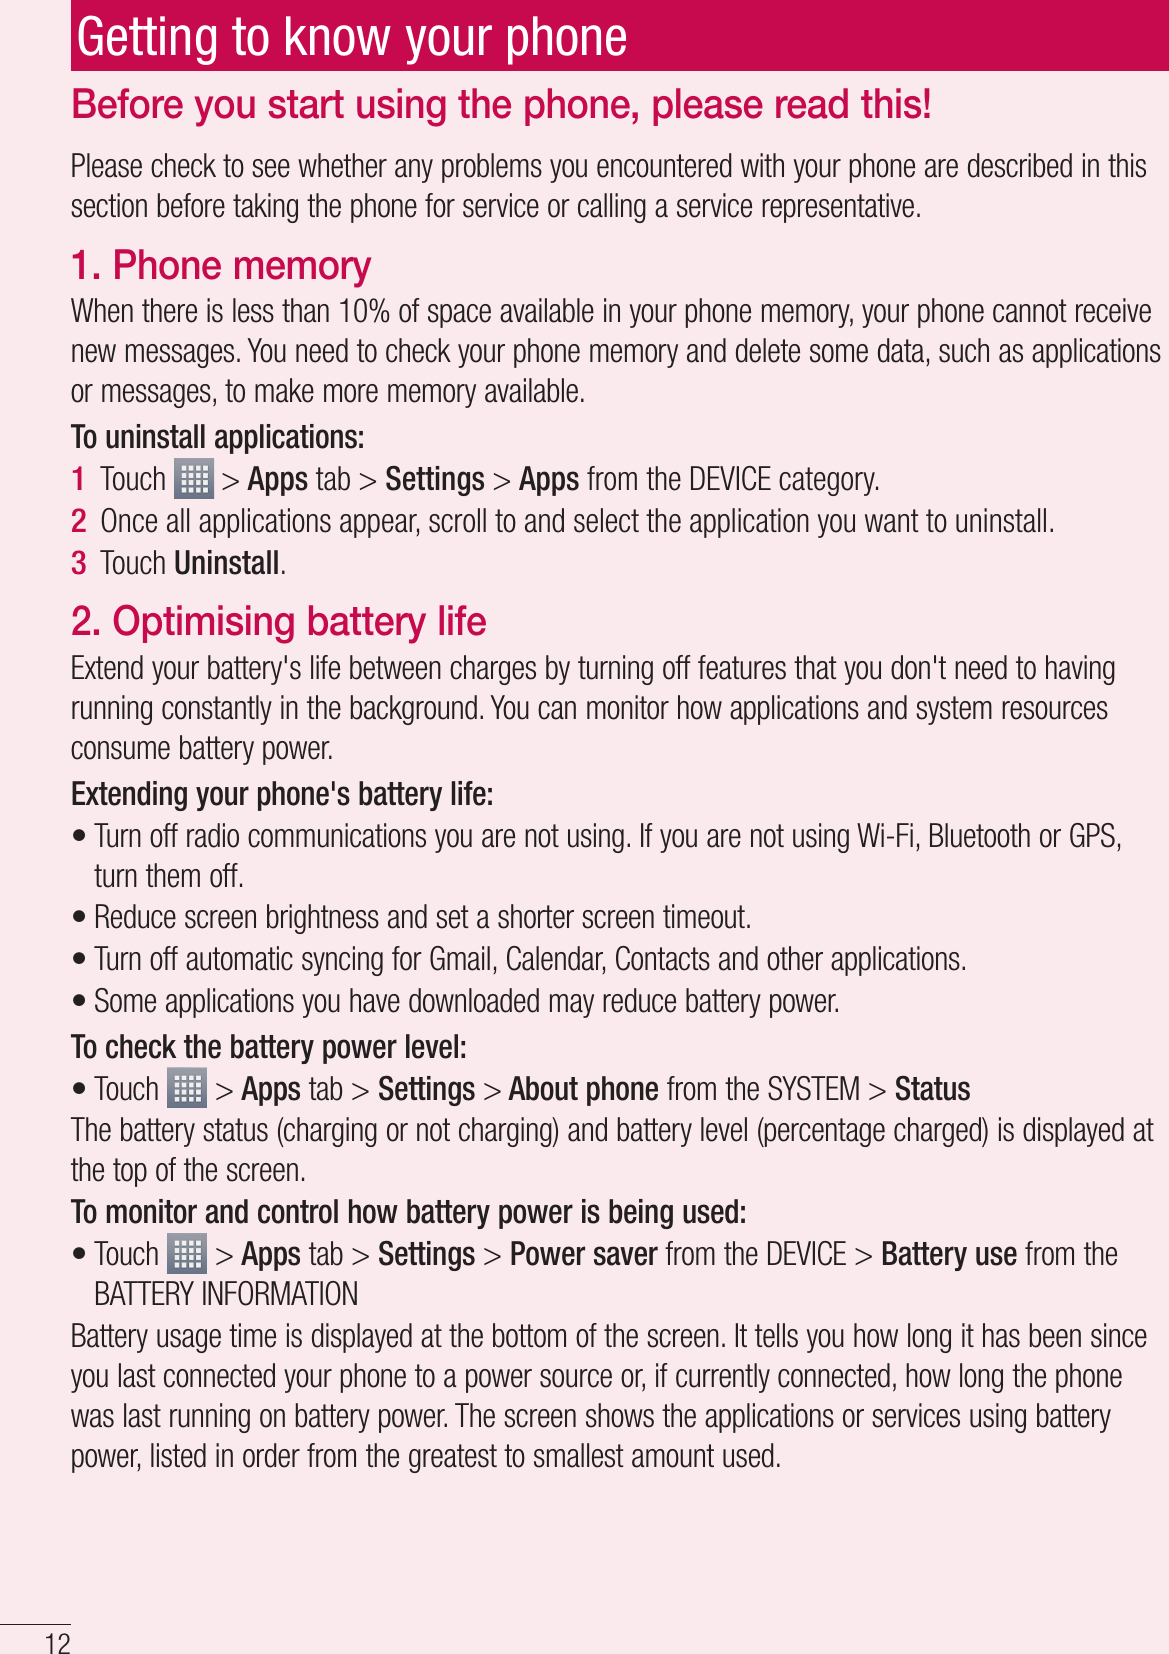 12Please check to see whether any problems you encountered with your phone are described in this section before taking the phone for service or calling a service representative.1. Phone memory When there is less than 10% of space available in your phone memory, your phone cannot receive new messages. You need to check your phone memory and delete some data, such as applications or messages, to make more memory available.To uninstall applications:Touch   &gt; Apps tab &gt; Settings &gt; Apps from the DEVICE category.Once all applications appear, scroll to and select the application you want to uninstall.Touch Uninstall.2. Optimising battery lifeExtend your battery&apos;s life between charges by turning off features that you don&apos;t need to having running constantly in the background. You can monitor how applications and system resources consume battery power. Extending your phone&apos;s battery life:Turn off radio communications you are not using. If you are not using Wi-Fi, Bluetooth or GPS, turn them off.Reduce screen brightness and set a shorter screen timeout.Turn off automatic syncing for Gmail, Calendar, Contacts and other applications.Some applications you have downloaded may reduce battery power.To check the battery power level:Touch   &gt; Apps tab &gt; Settings &gt; About phone from the SYSTEM &gt; StatusThe battery status (charging or not charging) and battery level (percentage charged) is displayed at the top of the screen.To monitor and control how battery power is being used:Touch   &gt; Apps tab &gt; Settings &gt; Power saver from the DEVICE &gt; Battery use from the BATTERY INFORMATIONBattery usage time is displayed at the bottom of the screen. It tells you how long it has been since you last connected your phone to a power source or, if currently connected, how long the phone was last running on battery power. The screen shows the applications or services using battery power, listed in order from the greatest to smallest amount used.1 2 3 ••••••Before you start using the phone, please read this!Getting to know your phone